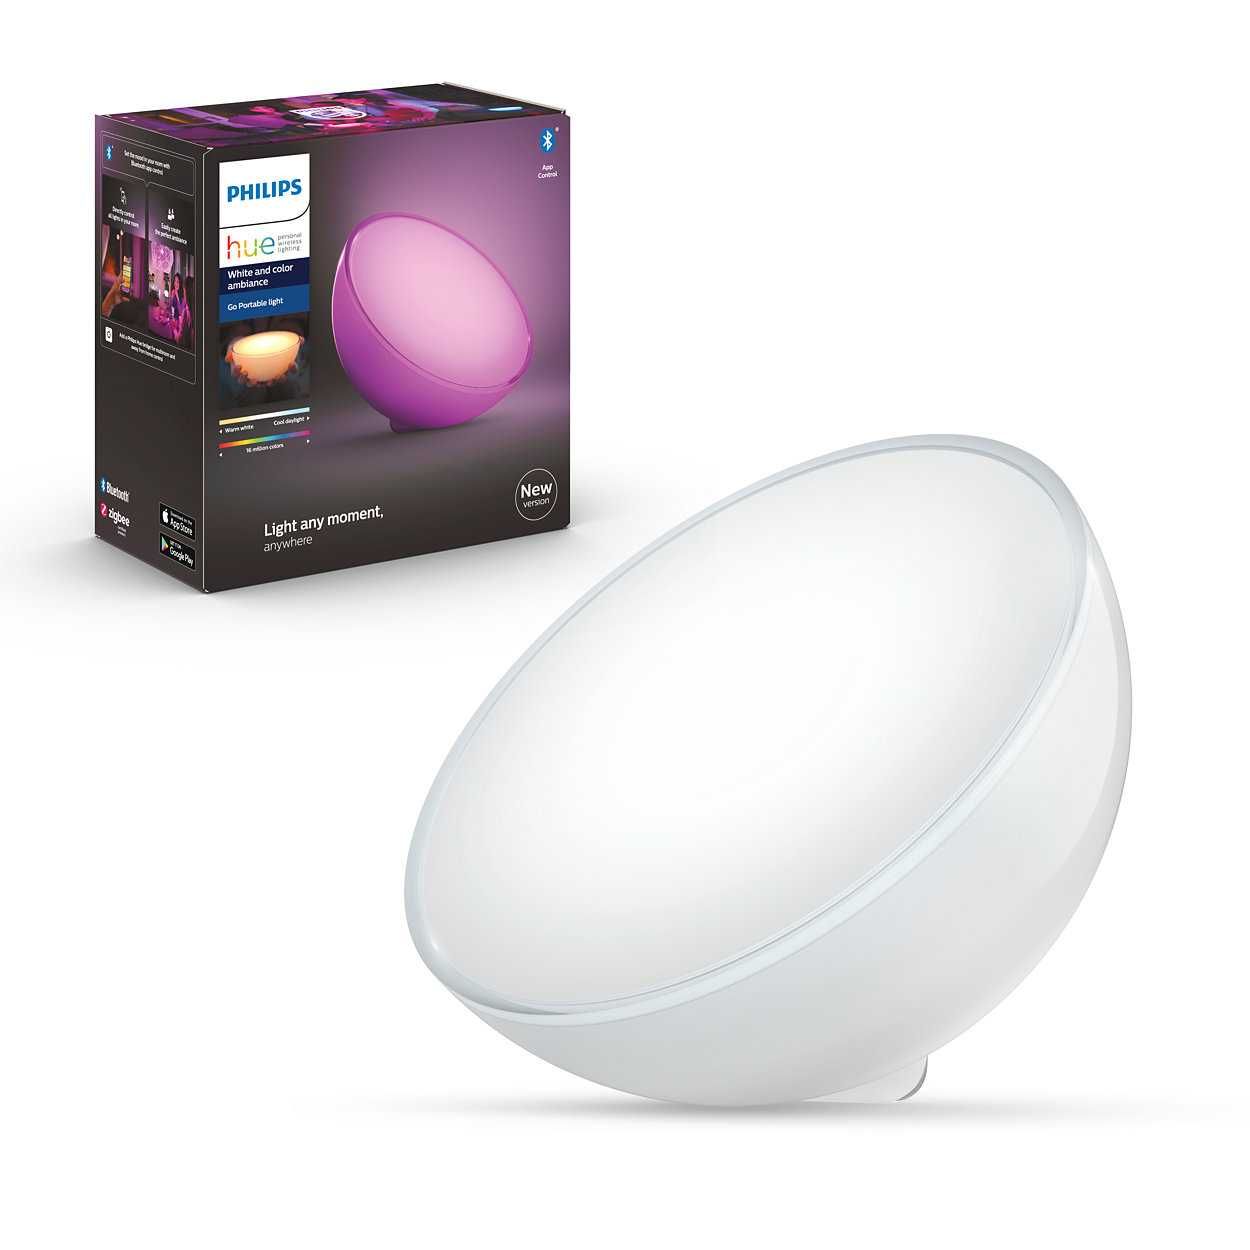 PHILIPS HUE Go LED White and Color